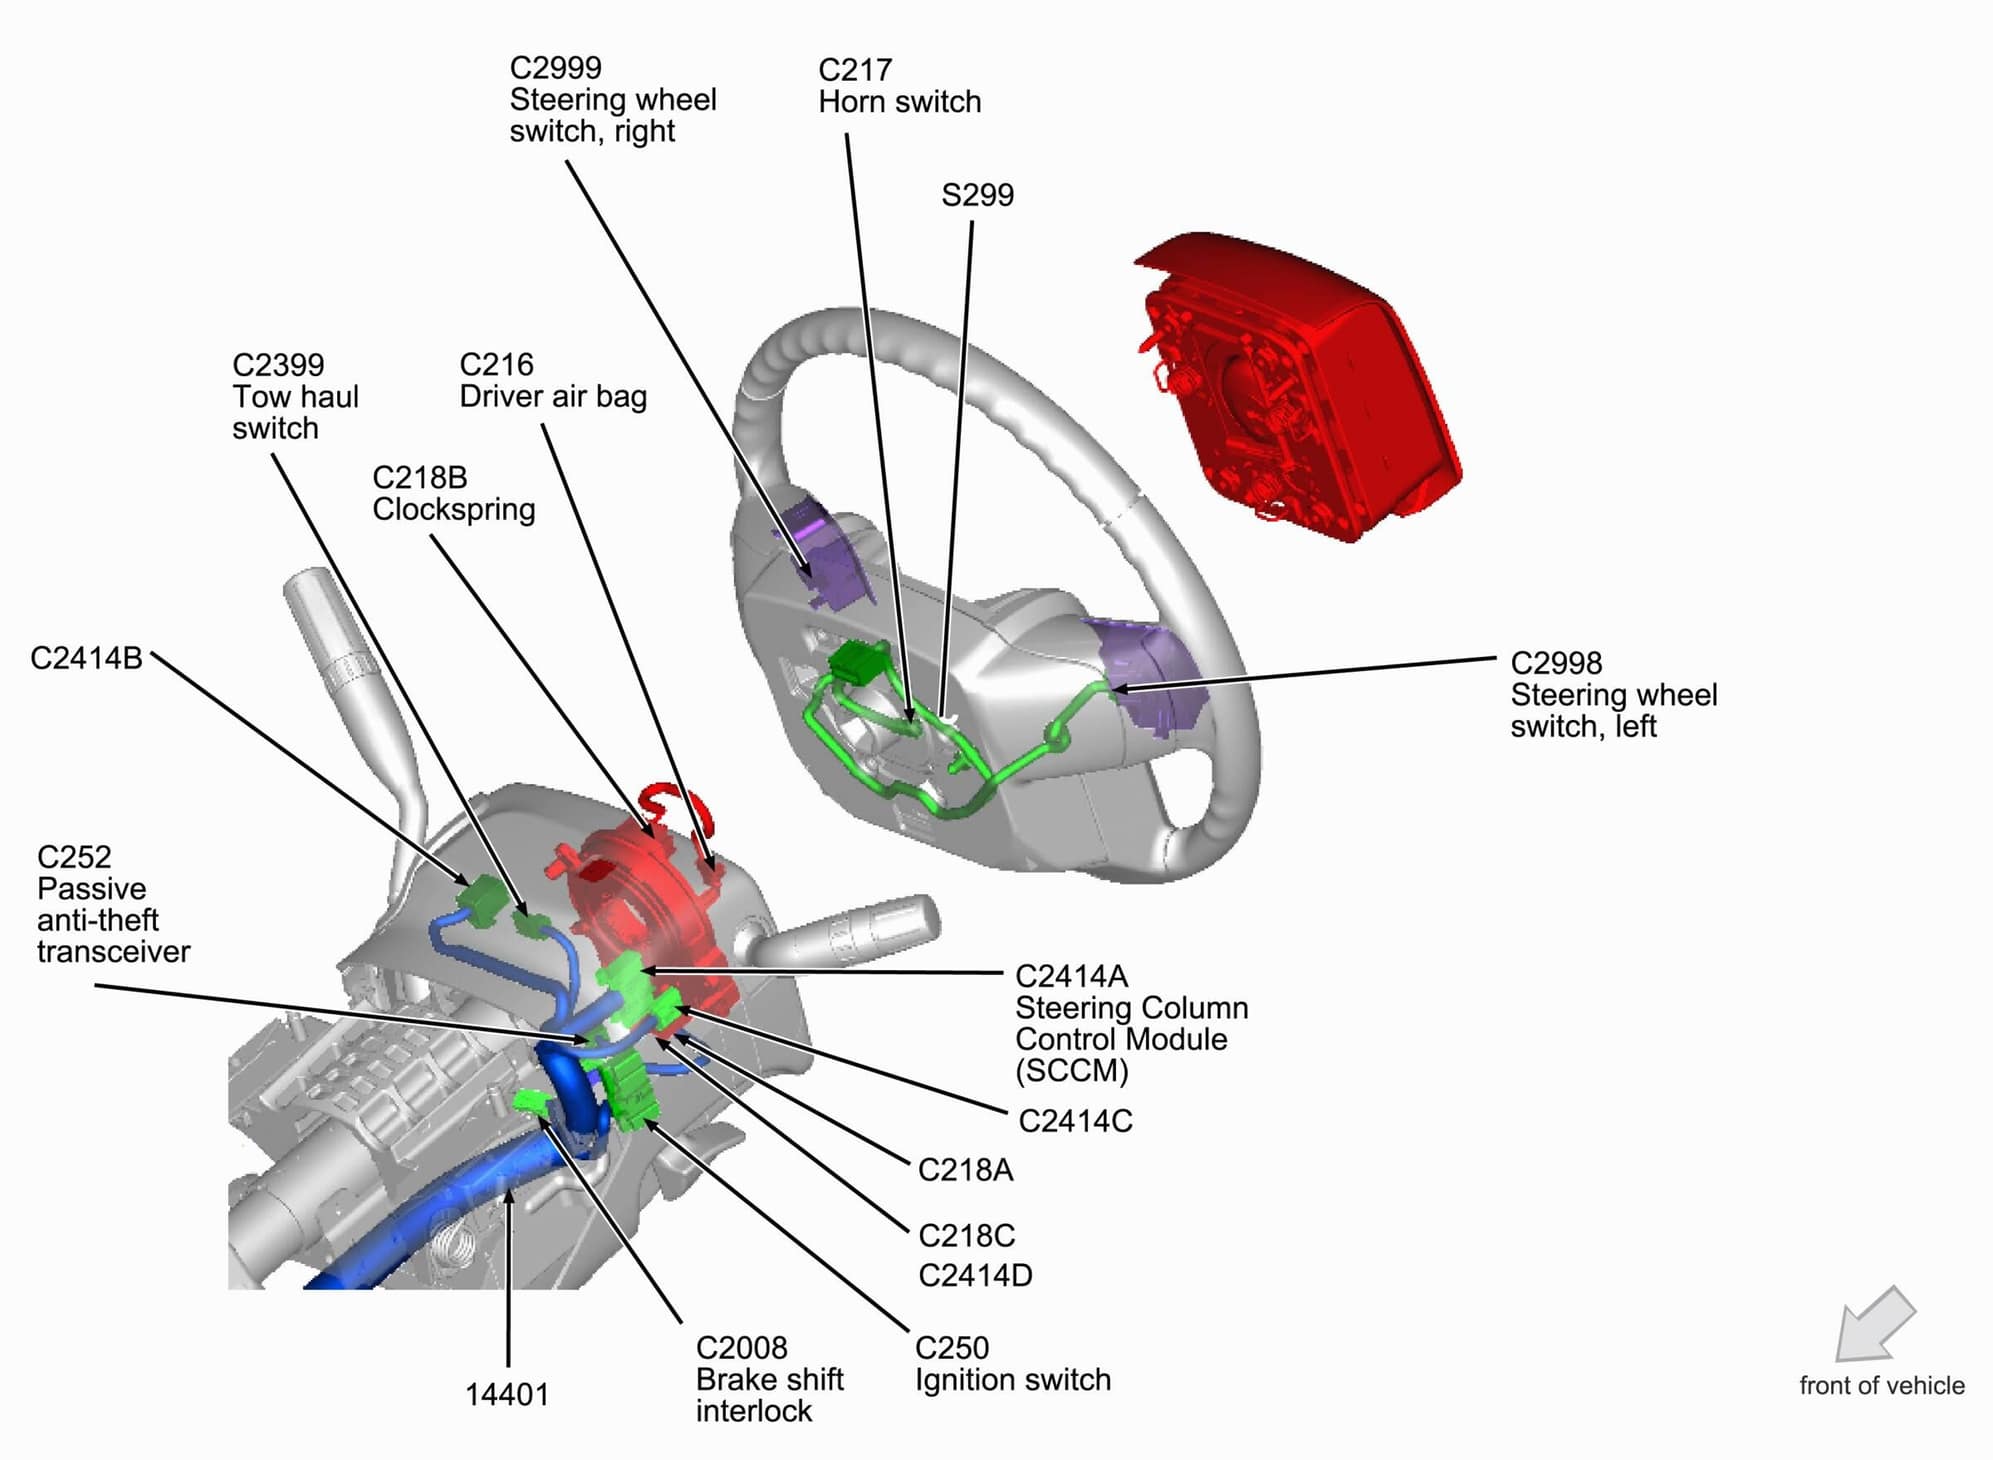 2016 F250 steering column wiring diagram - Ford Truck Enthusiasts Forums